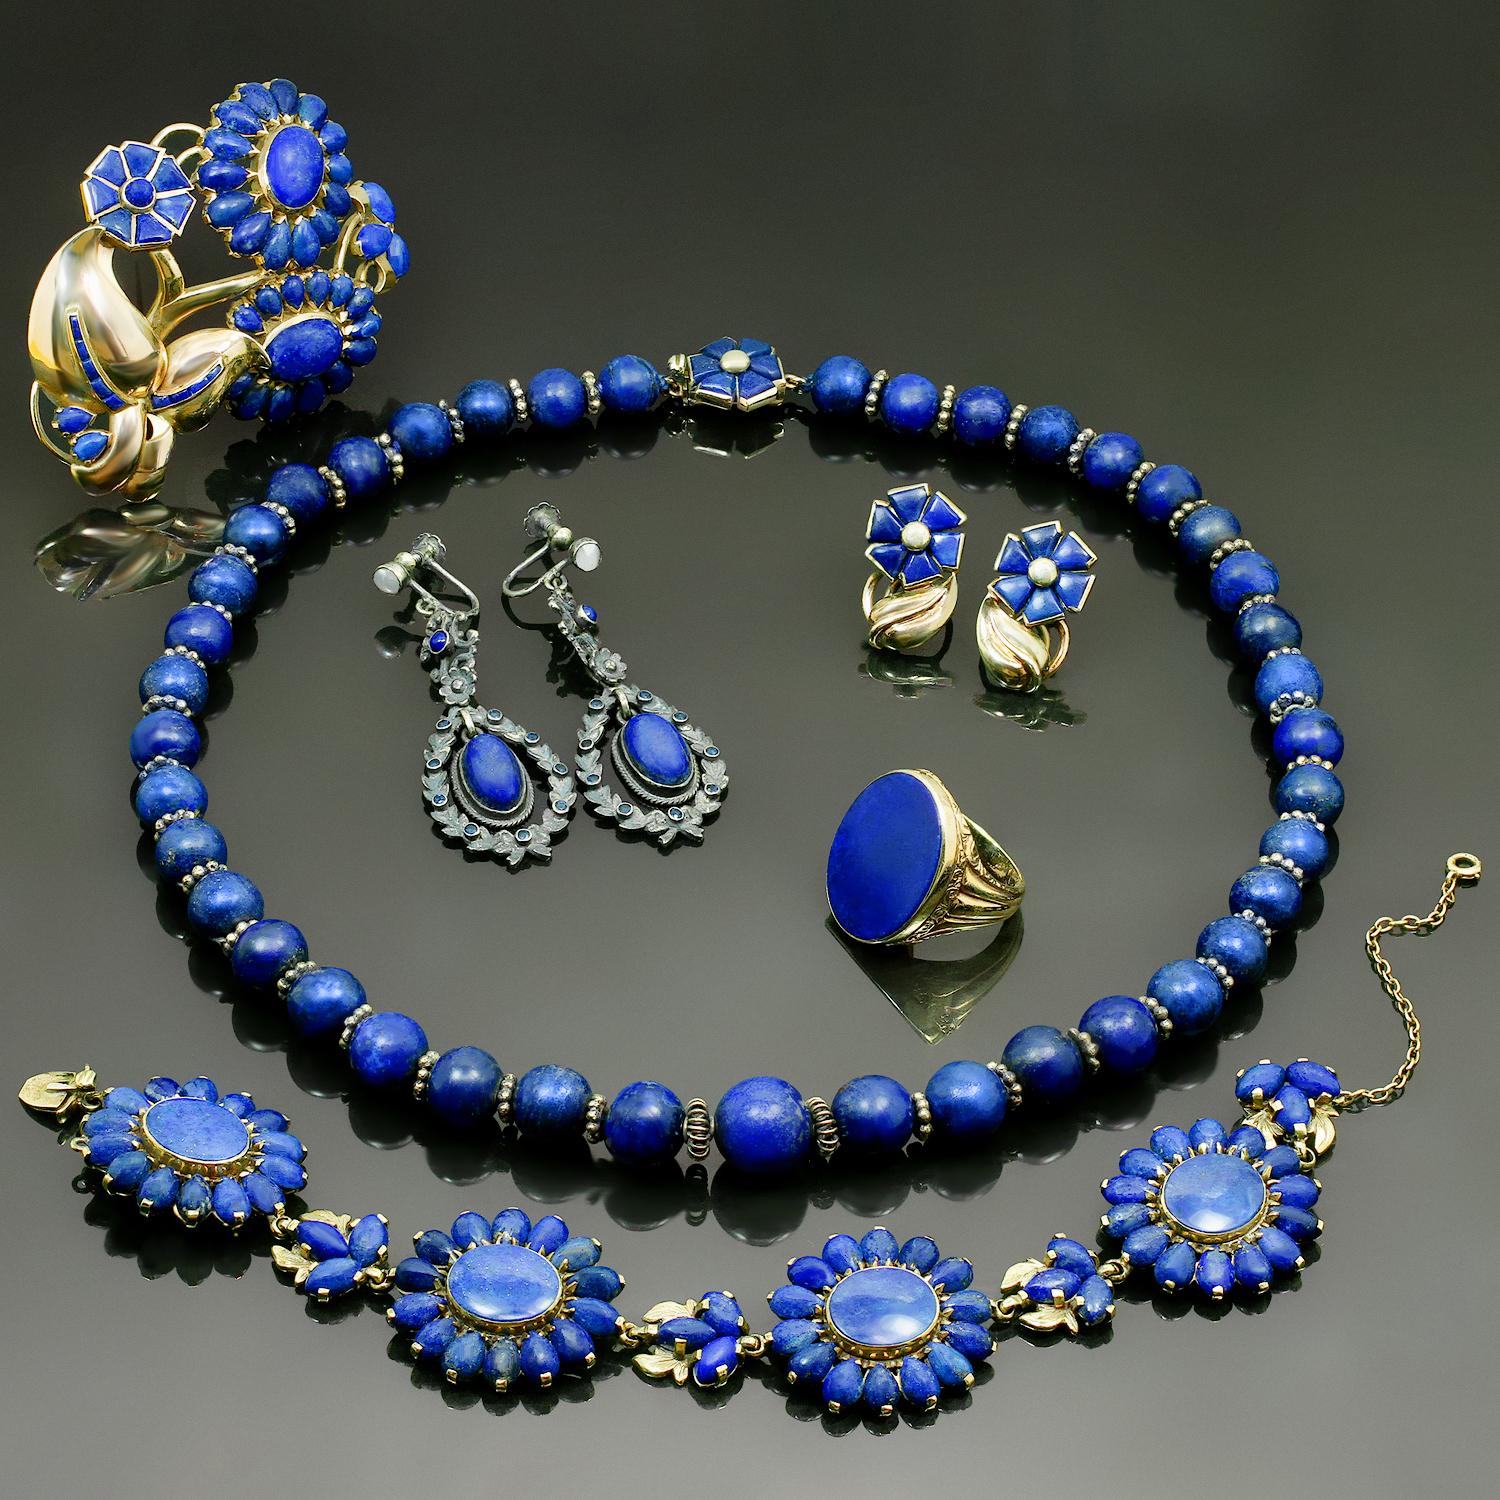 This rare and spectacular Seaman Schepps vintage jewelry suite consists of a beaded necklace, a link bracelet, a floral brooch, a pair of drop earrings, a pair of floral earrings, and a cocktail ring. All the pieces are beautifully set with lapis